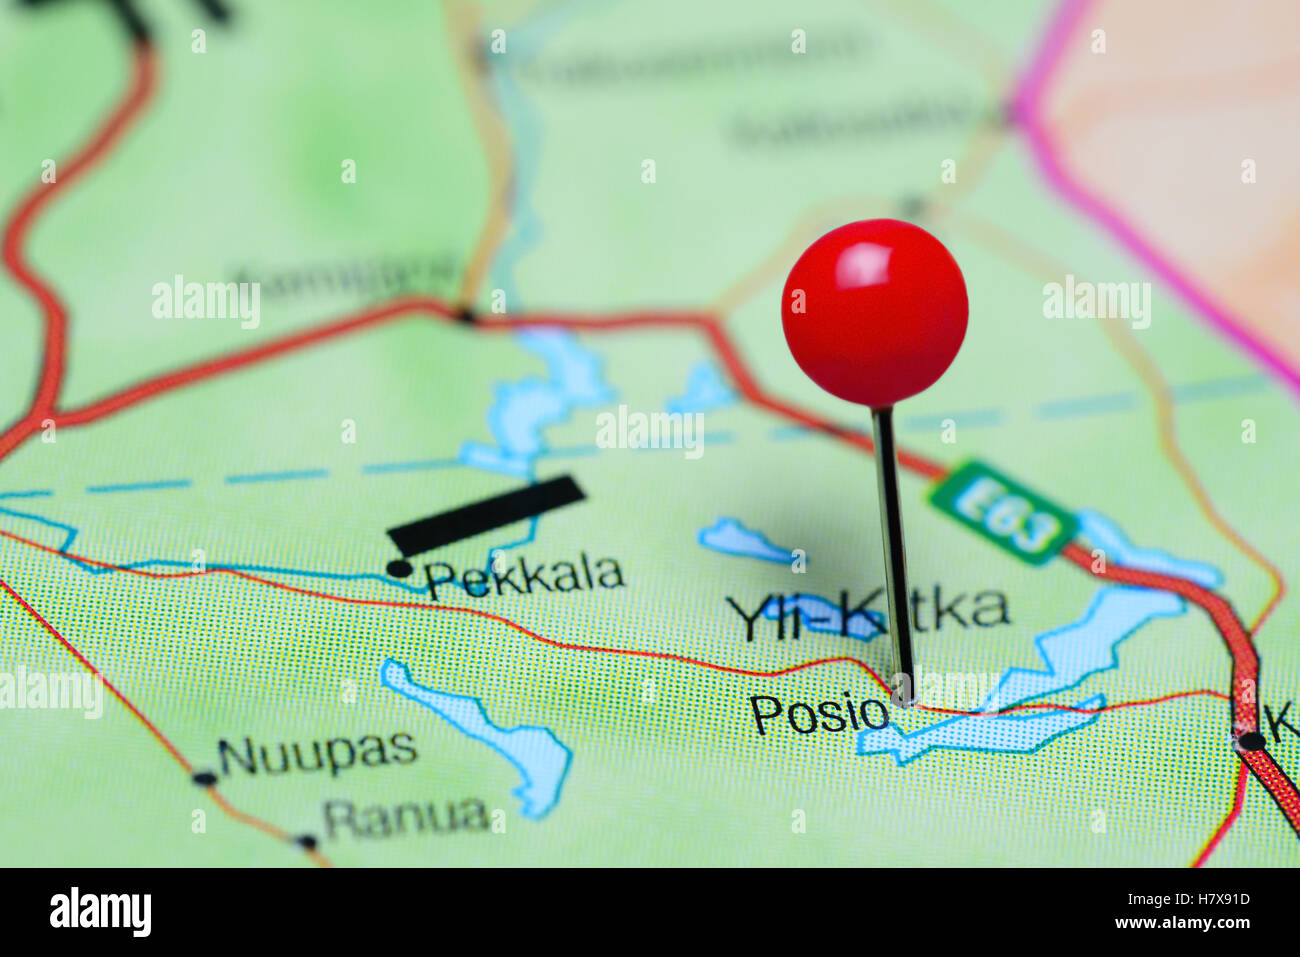 Posio pinned on a map of Finland Stock Photo